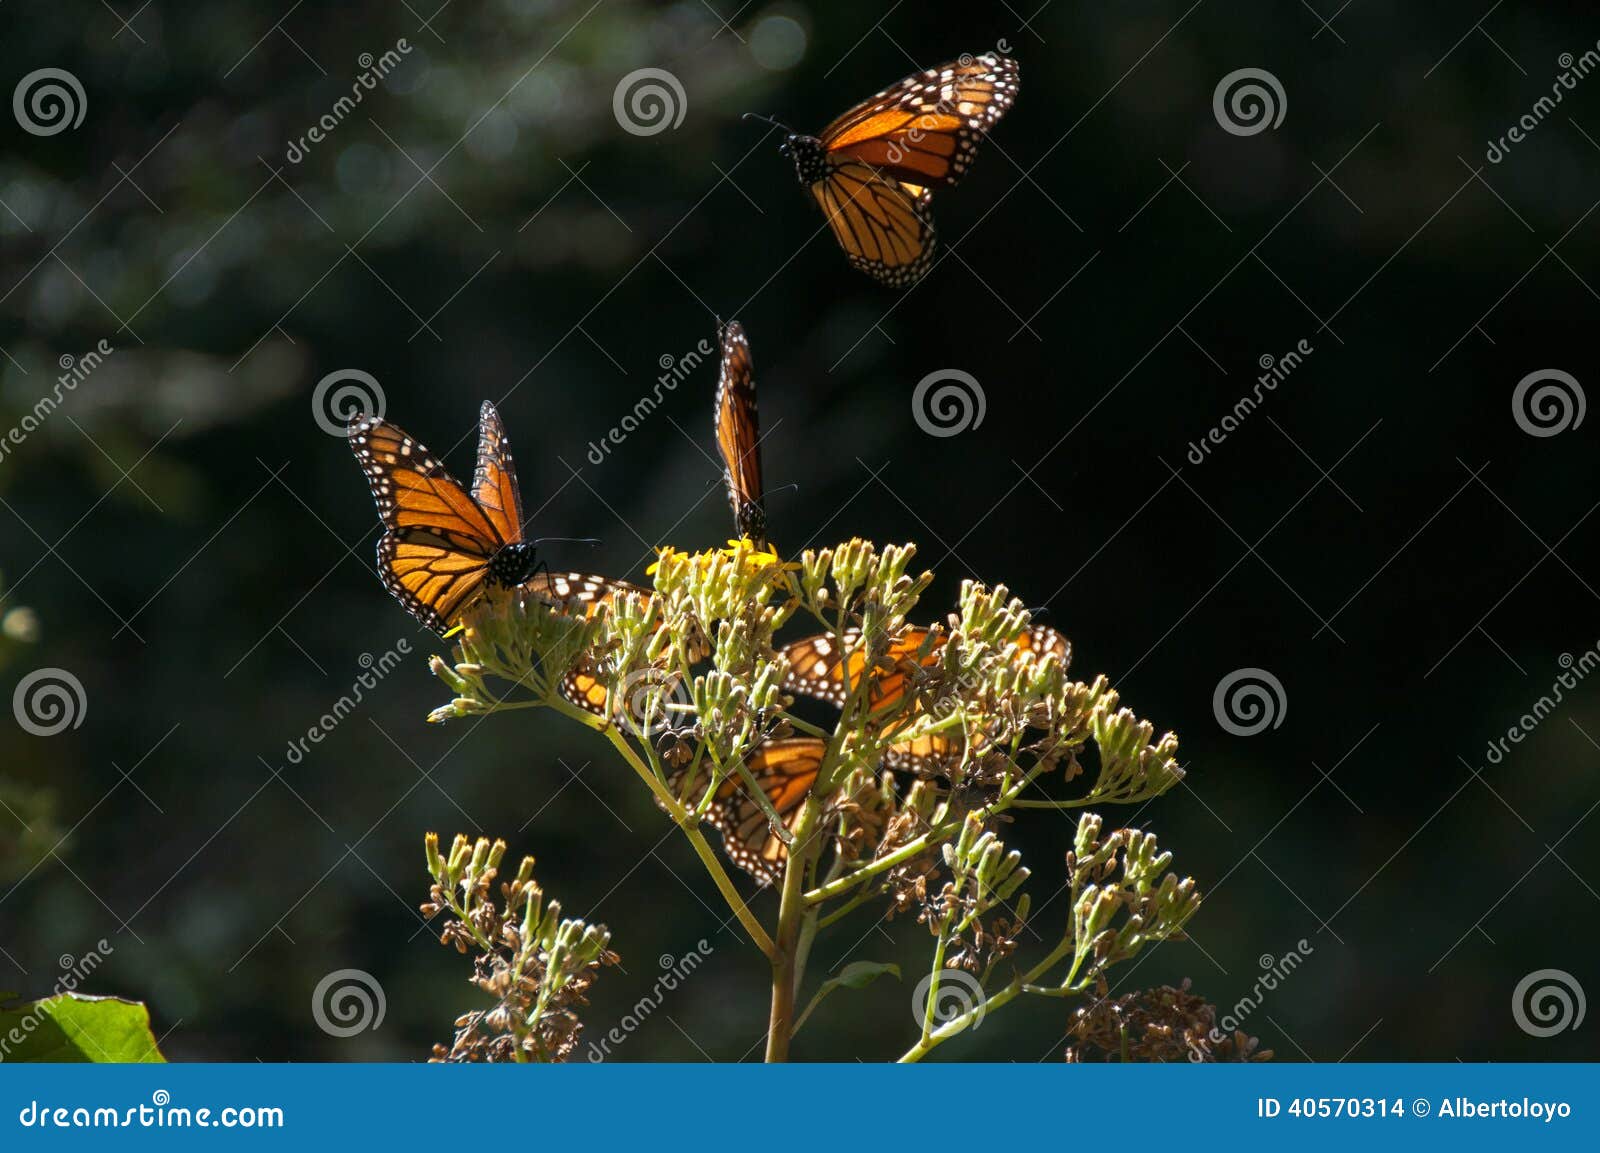 monarch butterfly biosphere reserve, michoacan (mexico)